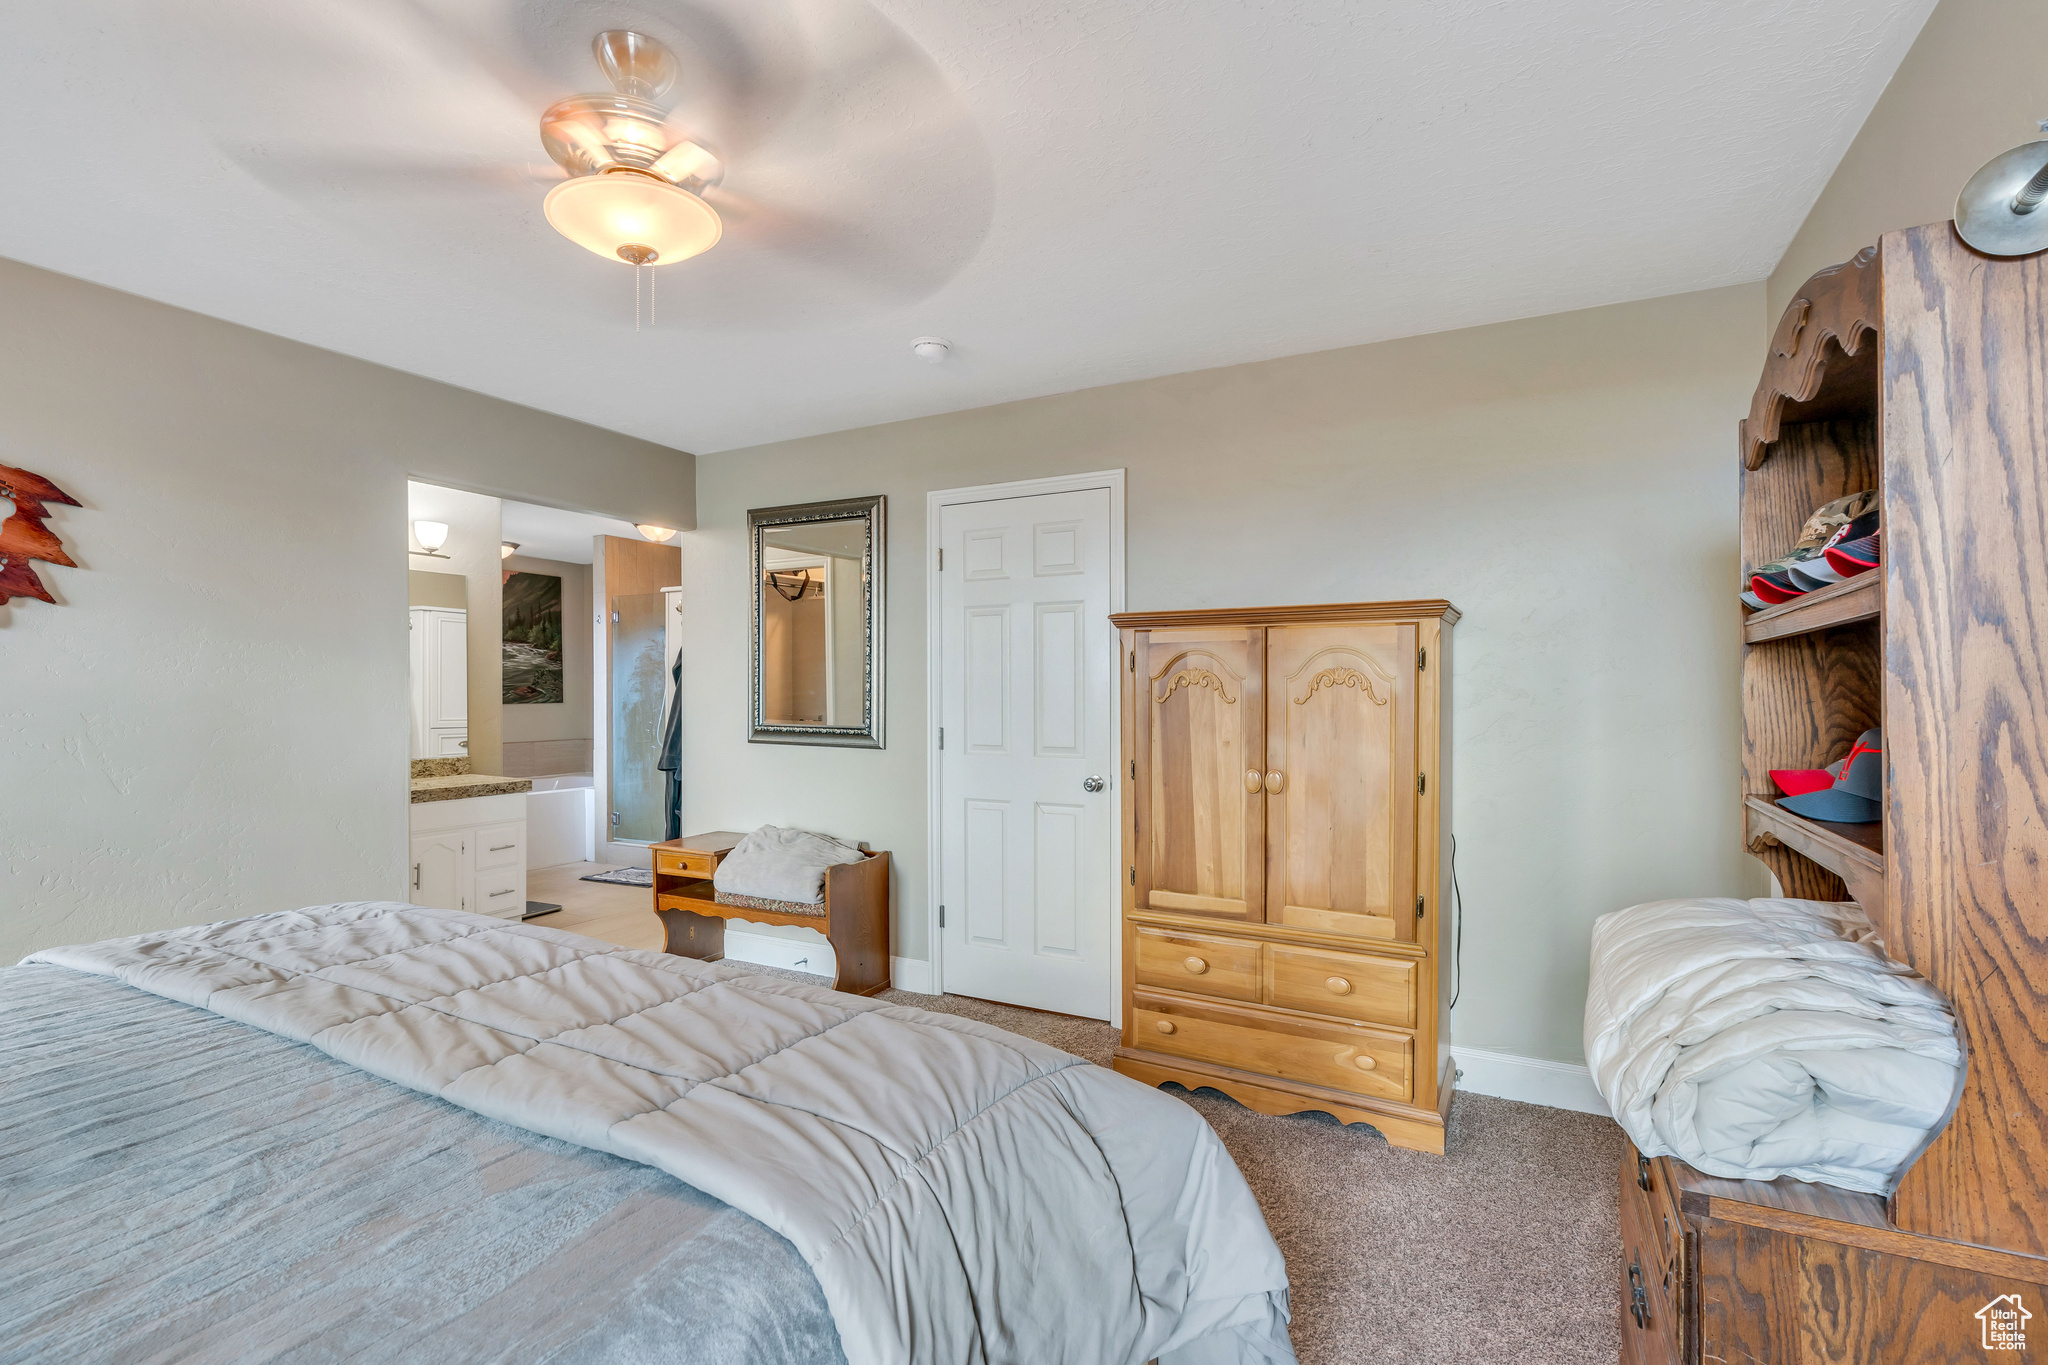 Primary Bedrooom with Master Bath and Walk-in Closet, also has entrance to the deck!